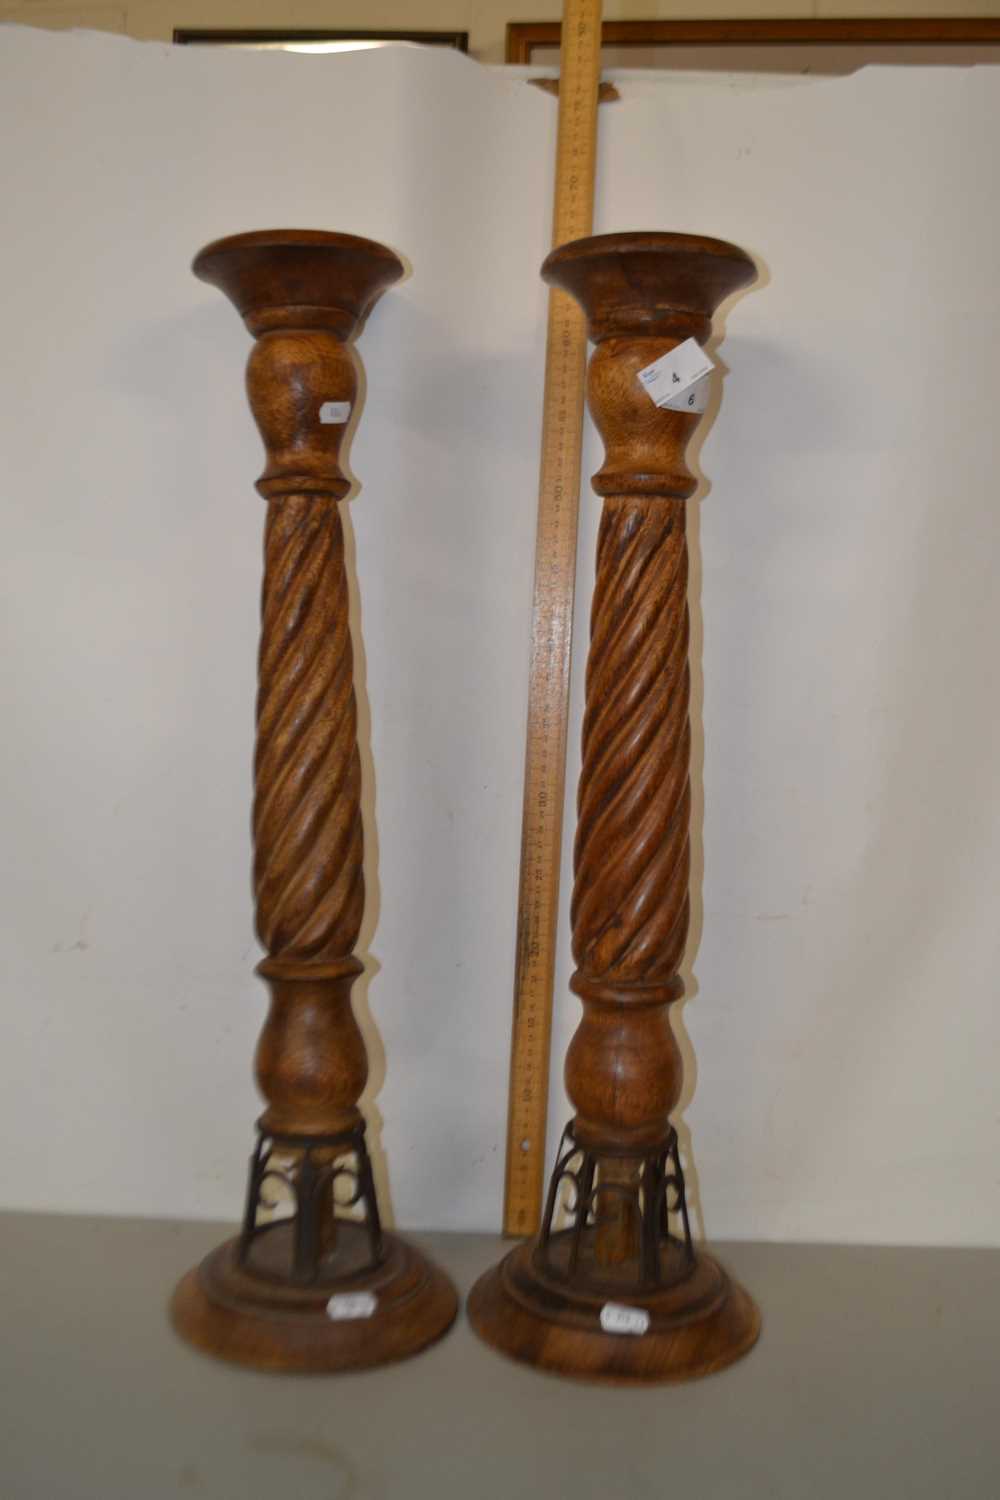 A pair of modern turned wooden candle stands